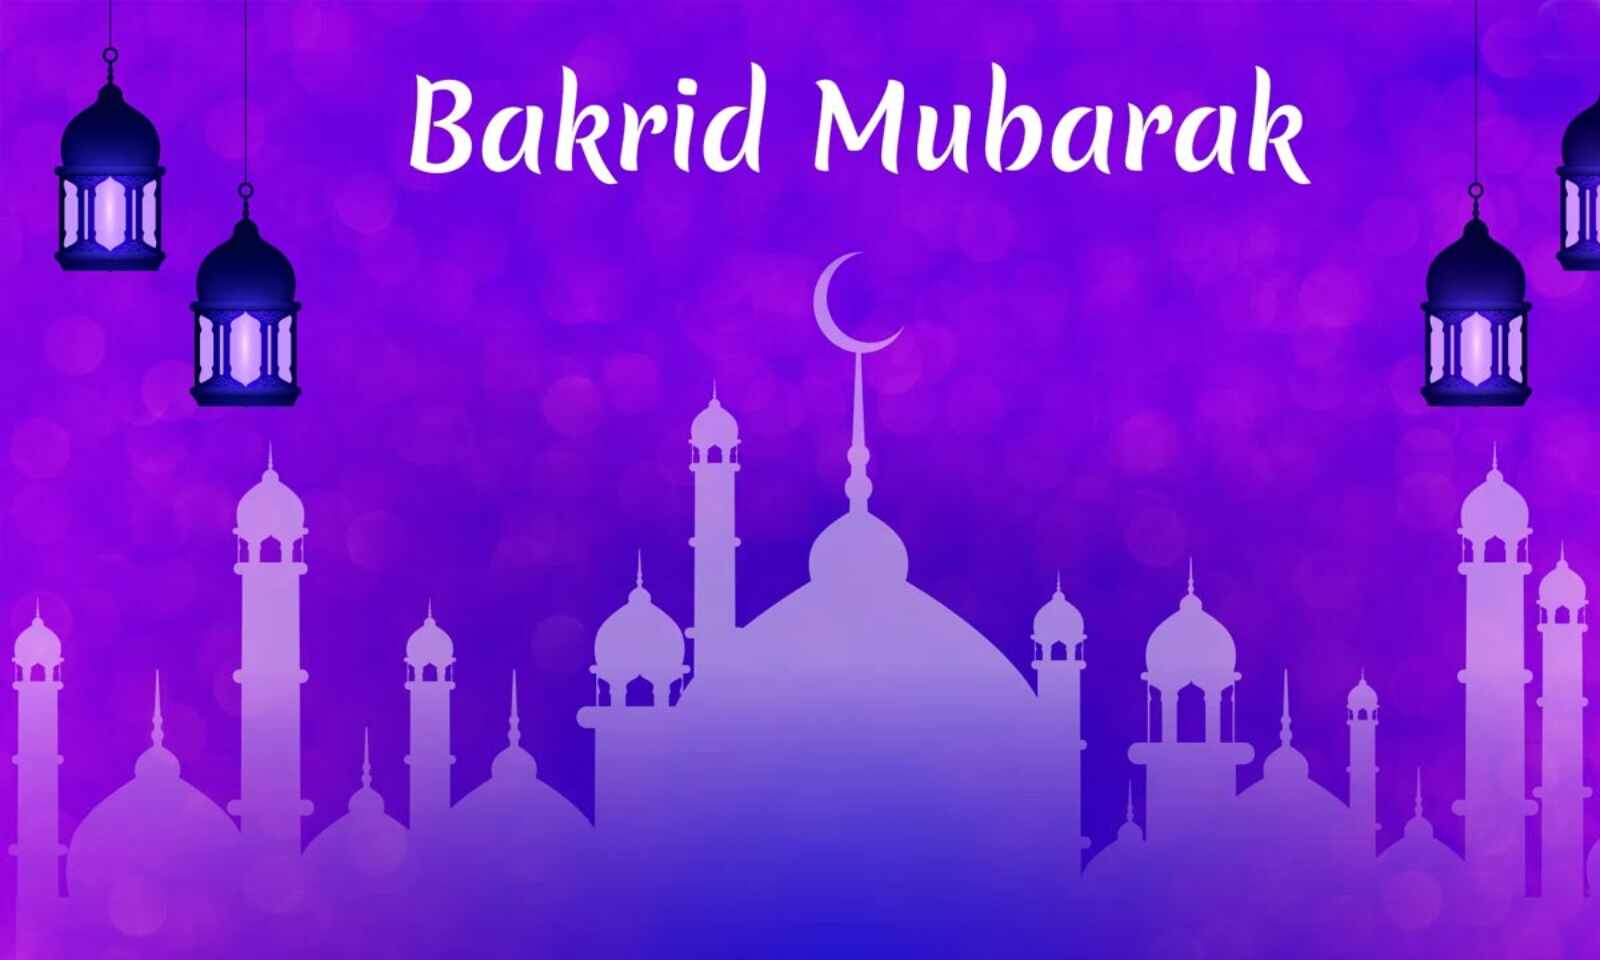 An Incredible Compilation of 999+ Bakrid Wishes Images in Full 4K Quality